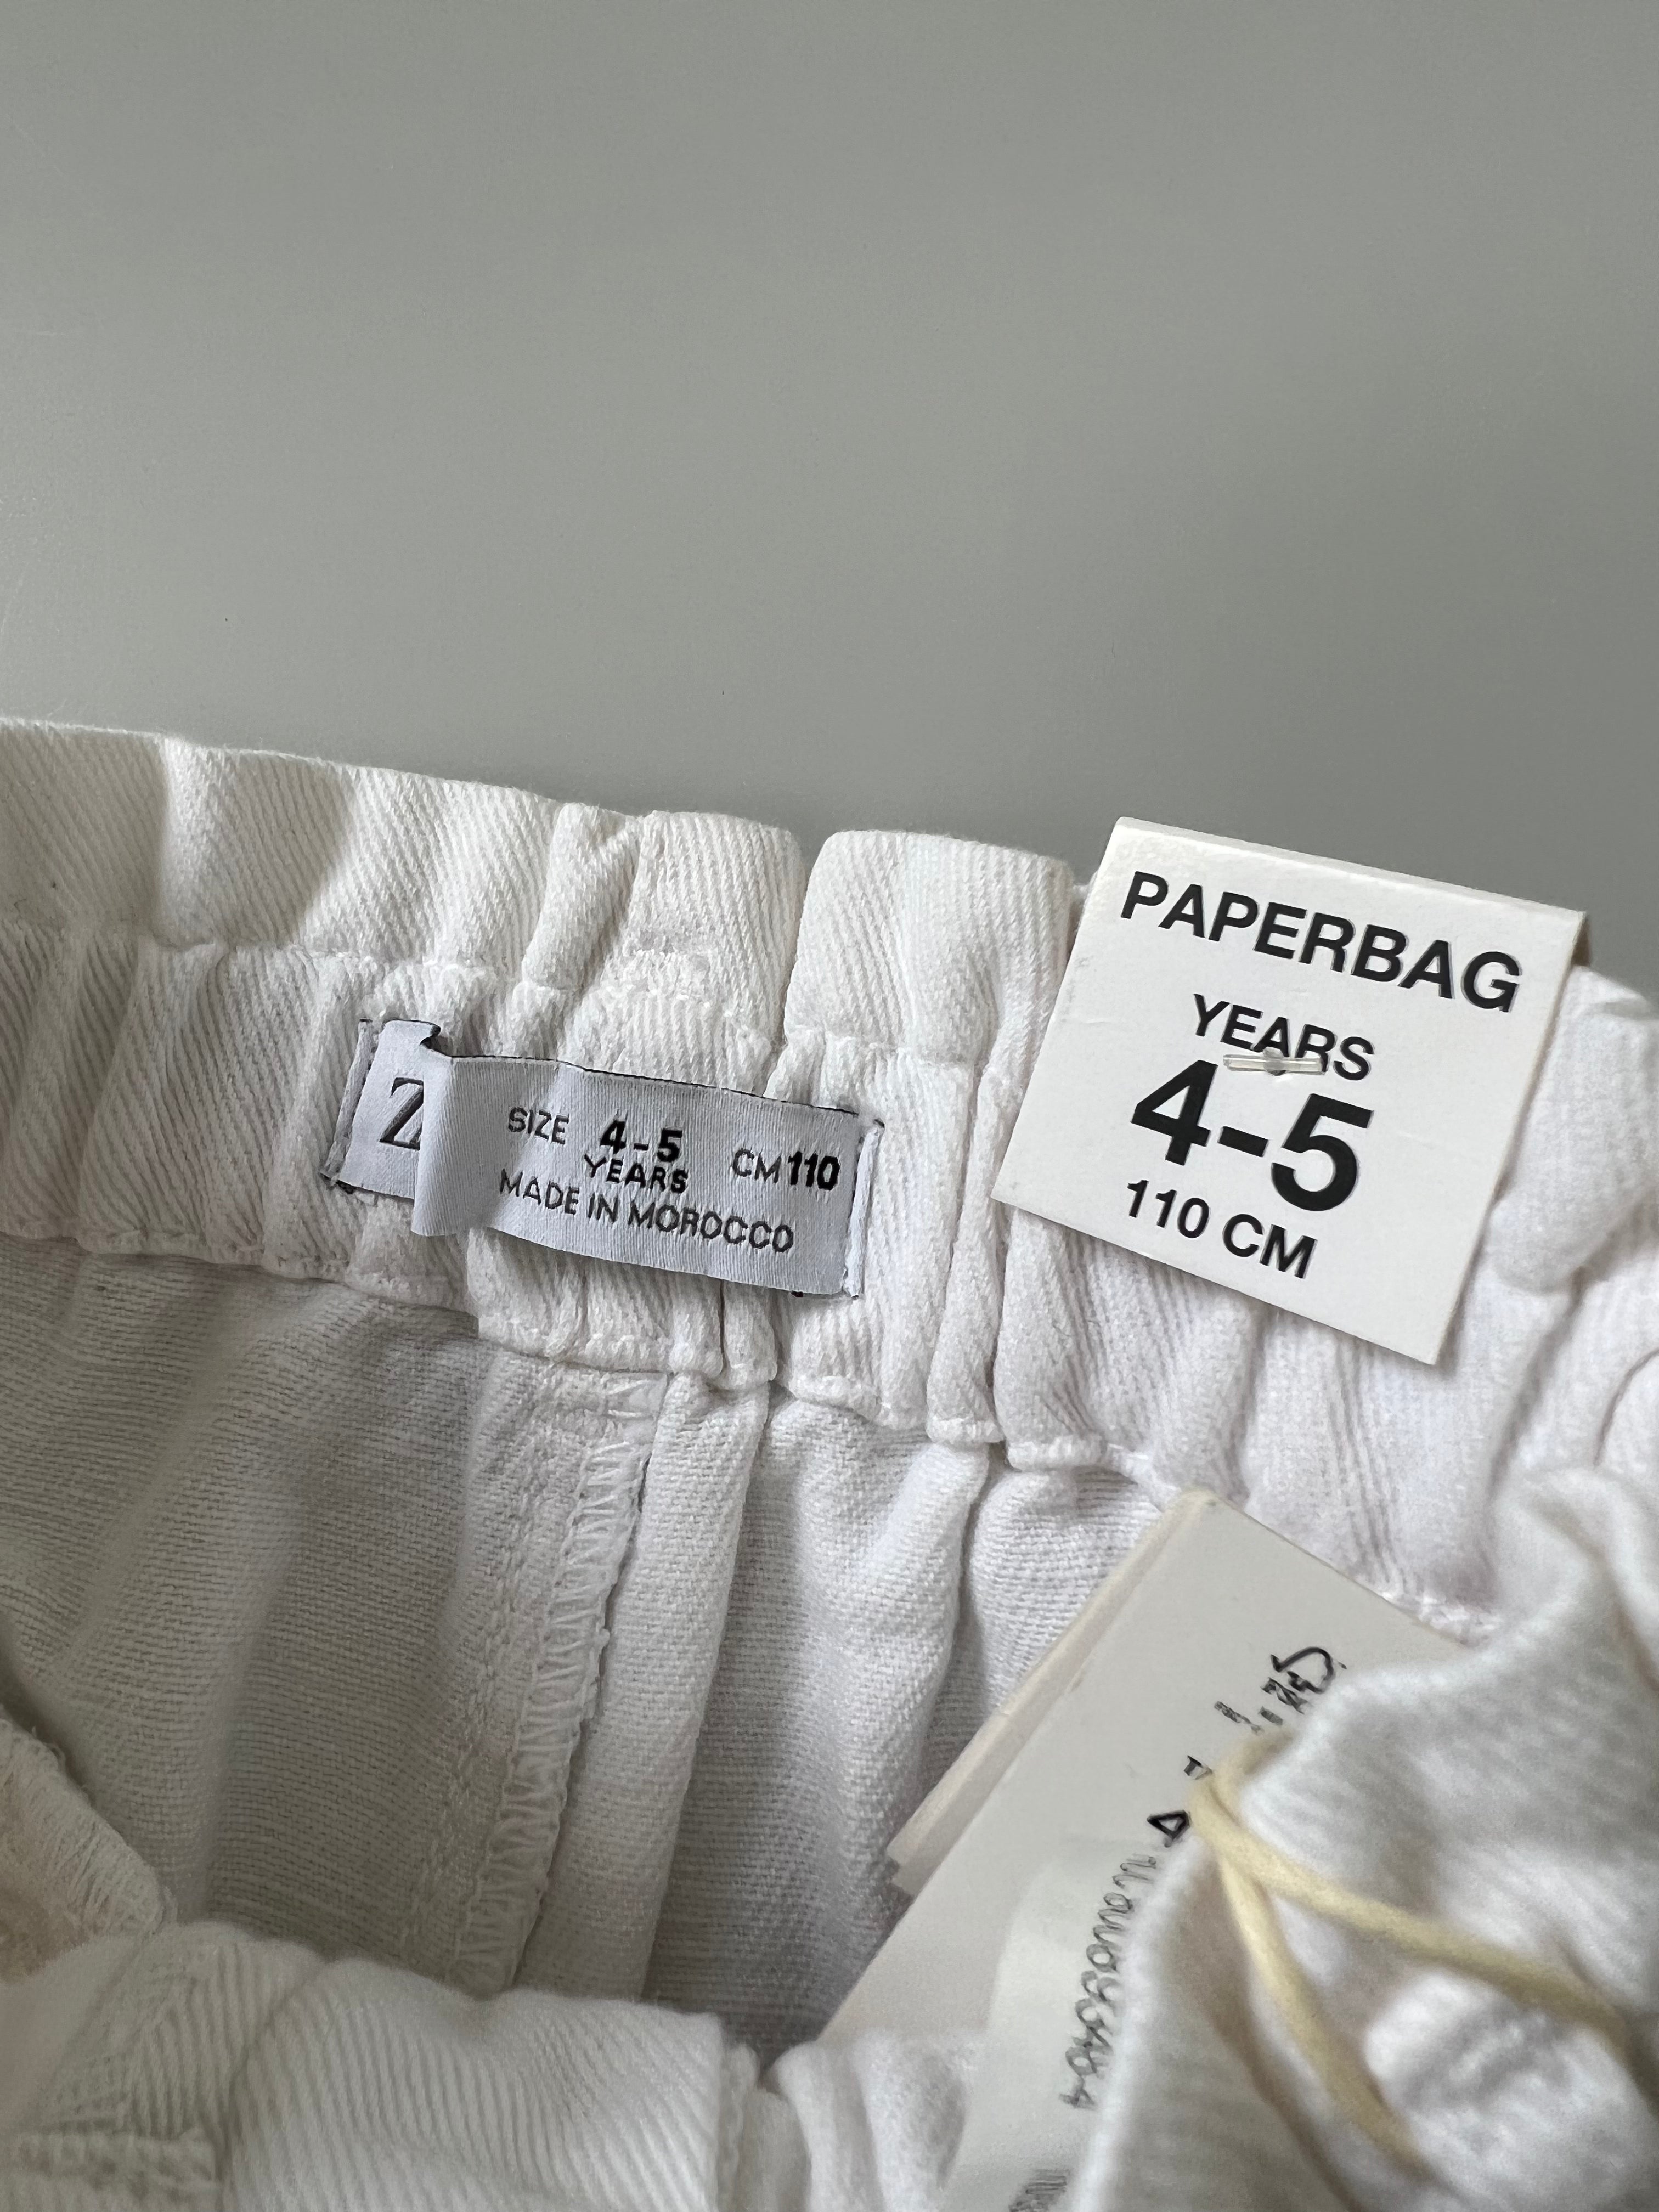 Zara Paperbag Jeans 4-5 years NEW